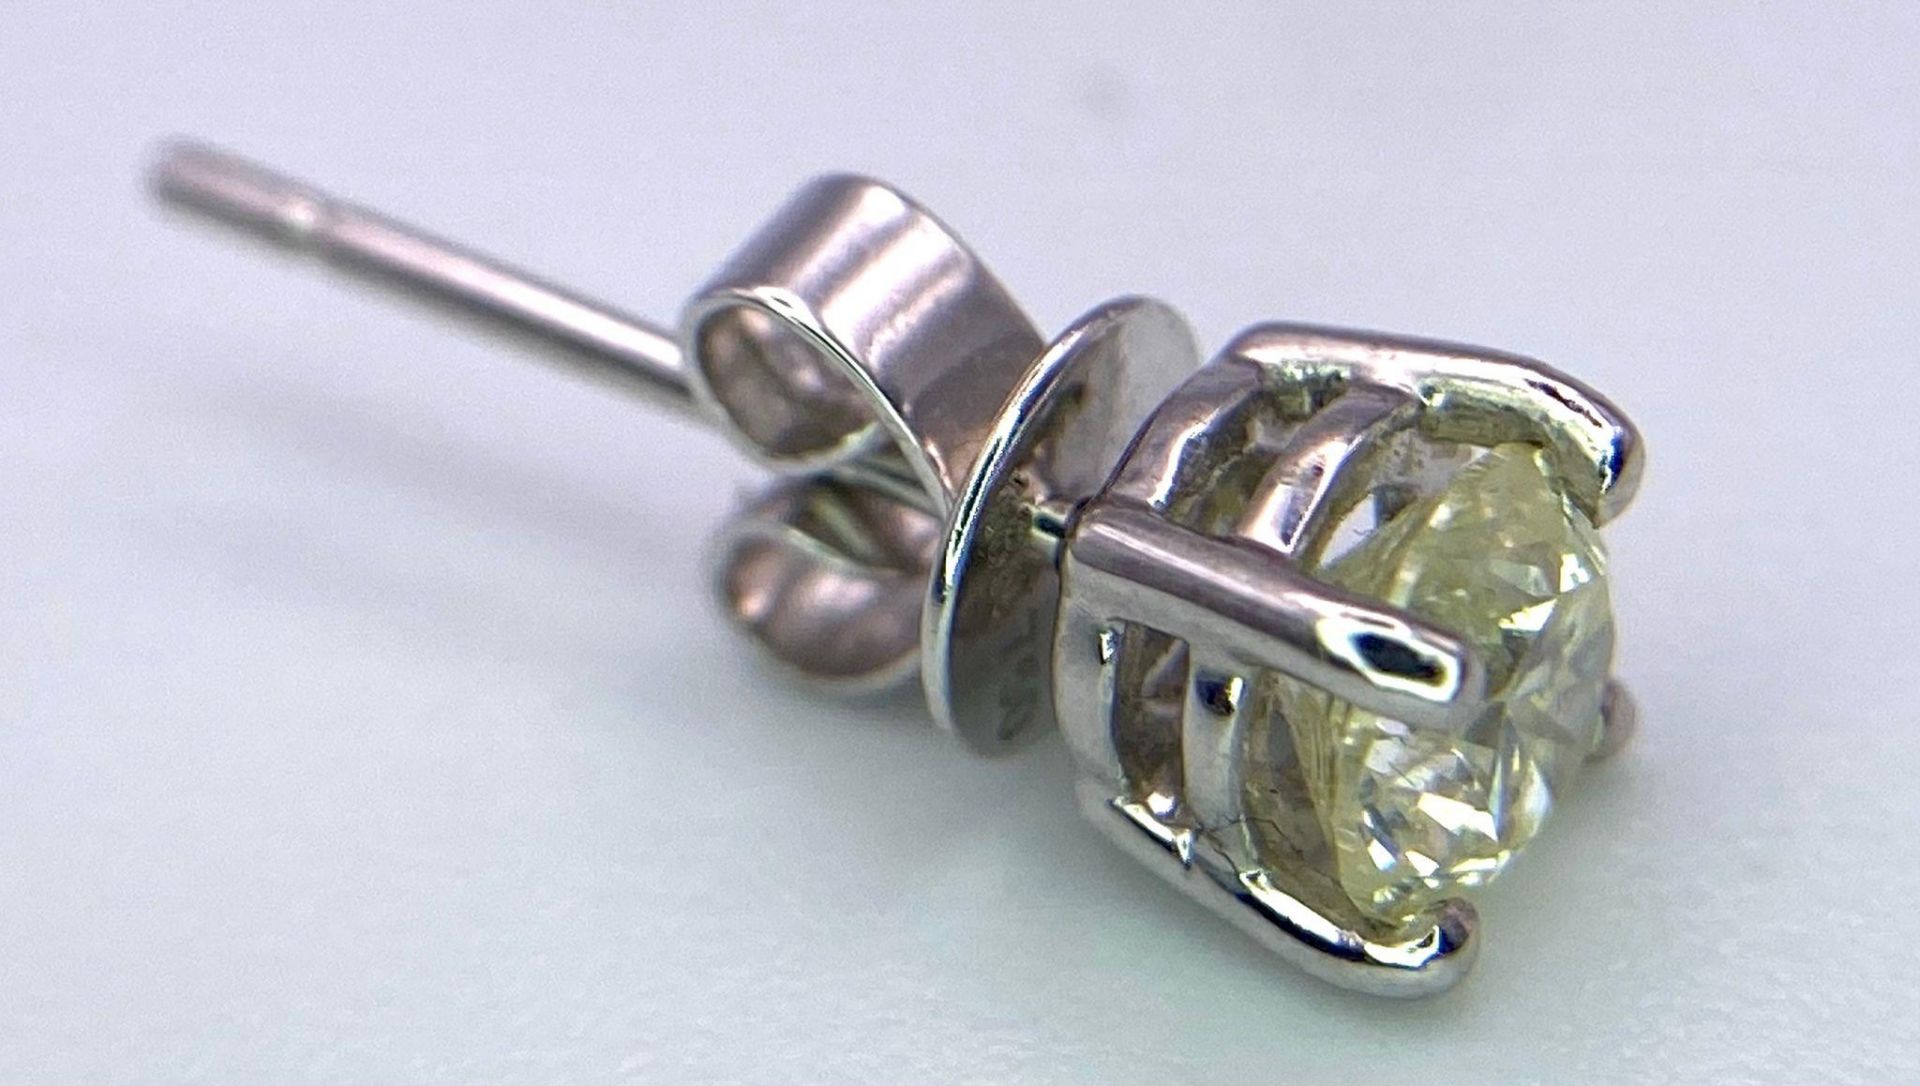 18K White Gold Diamond Single Solitaire Earring. Round Brilliant Cut 0.40CT Diamond. 4 Claw Setting. - Image 2 of 4